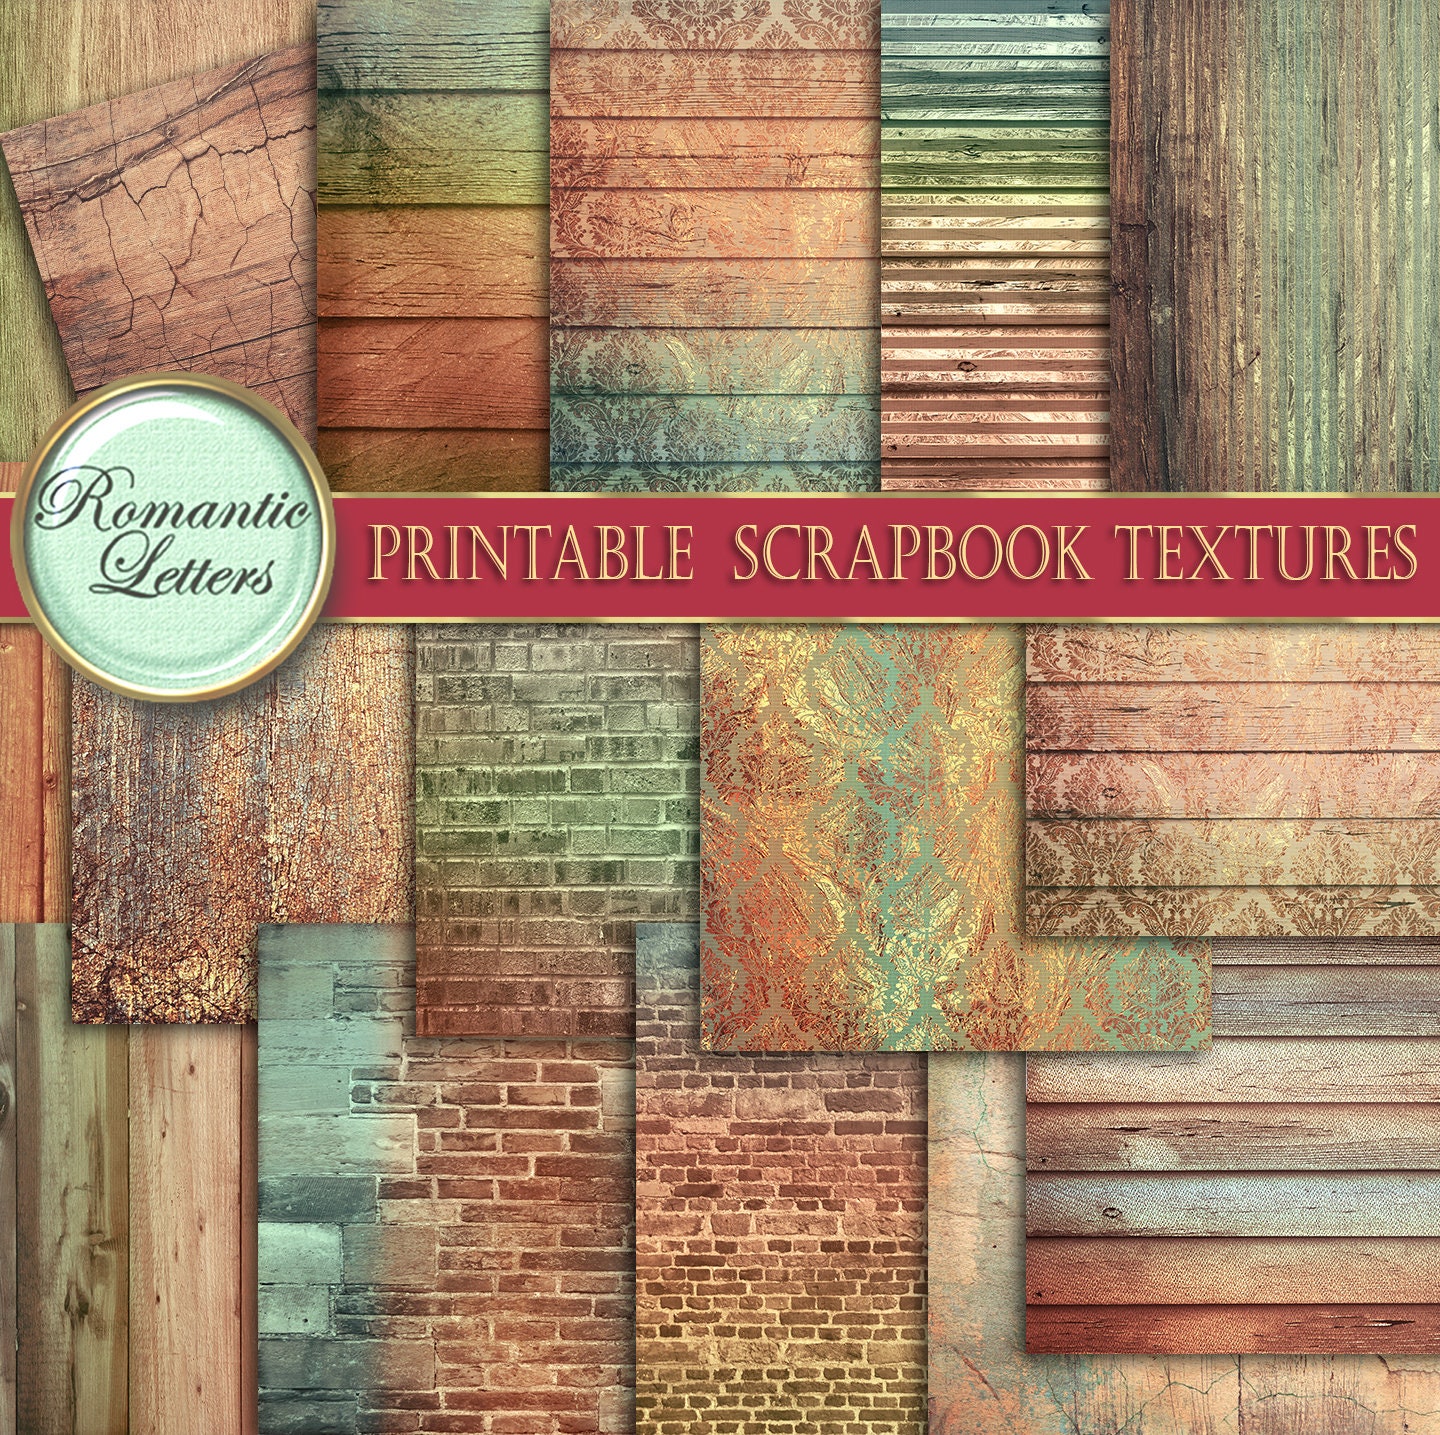 Background page design for a photo book, scrapbook or wallpaper in brown;  abstract wood texture Stock Illustration